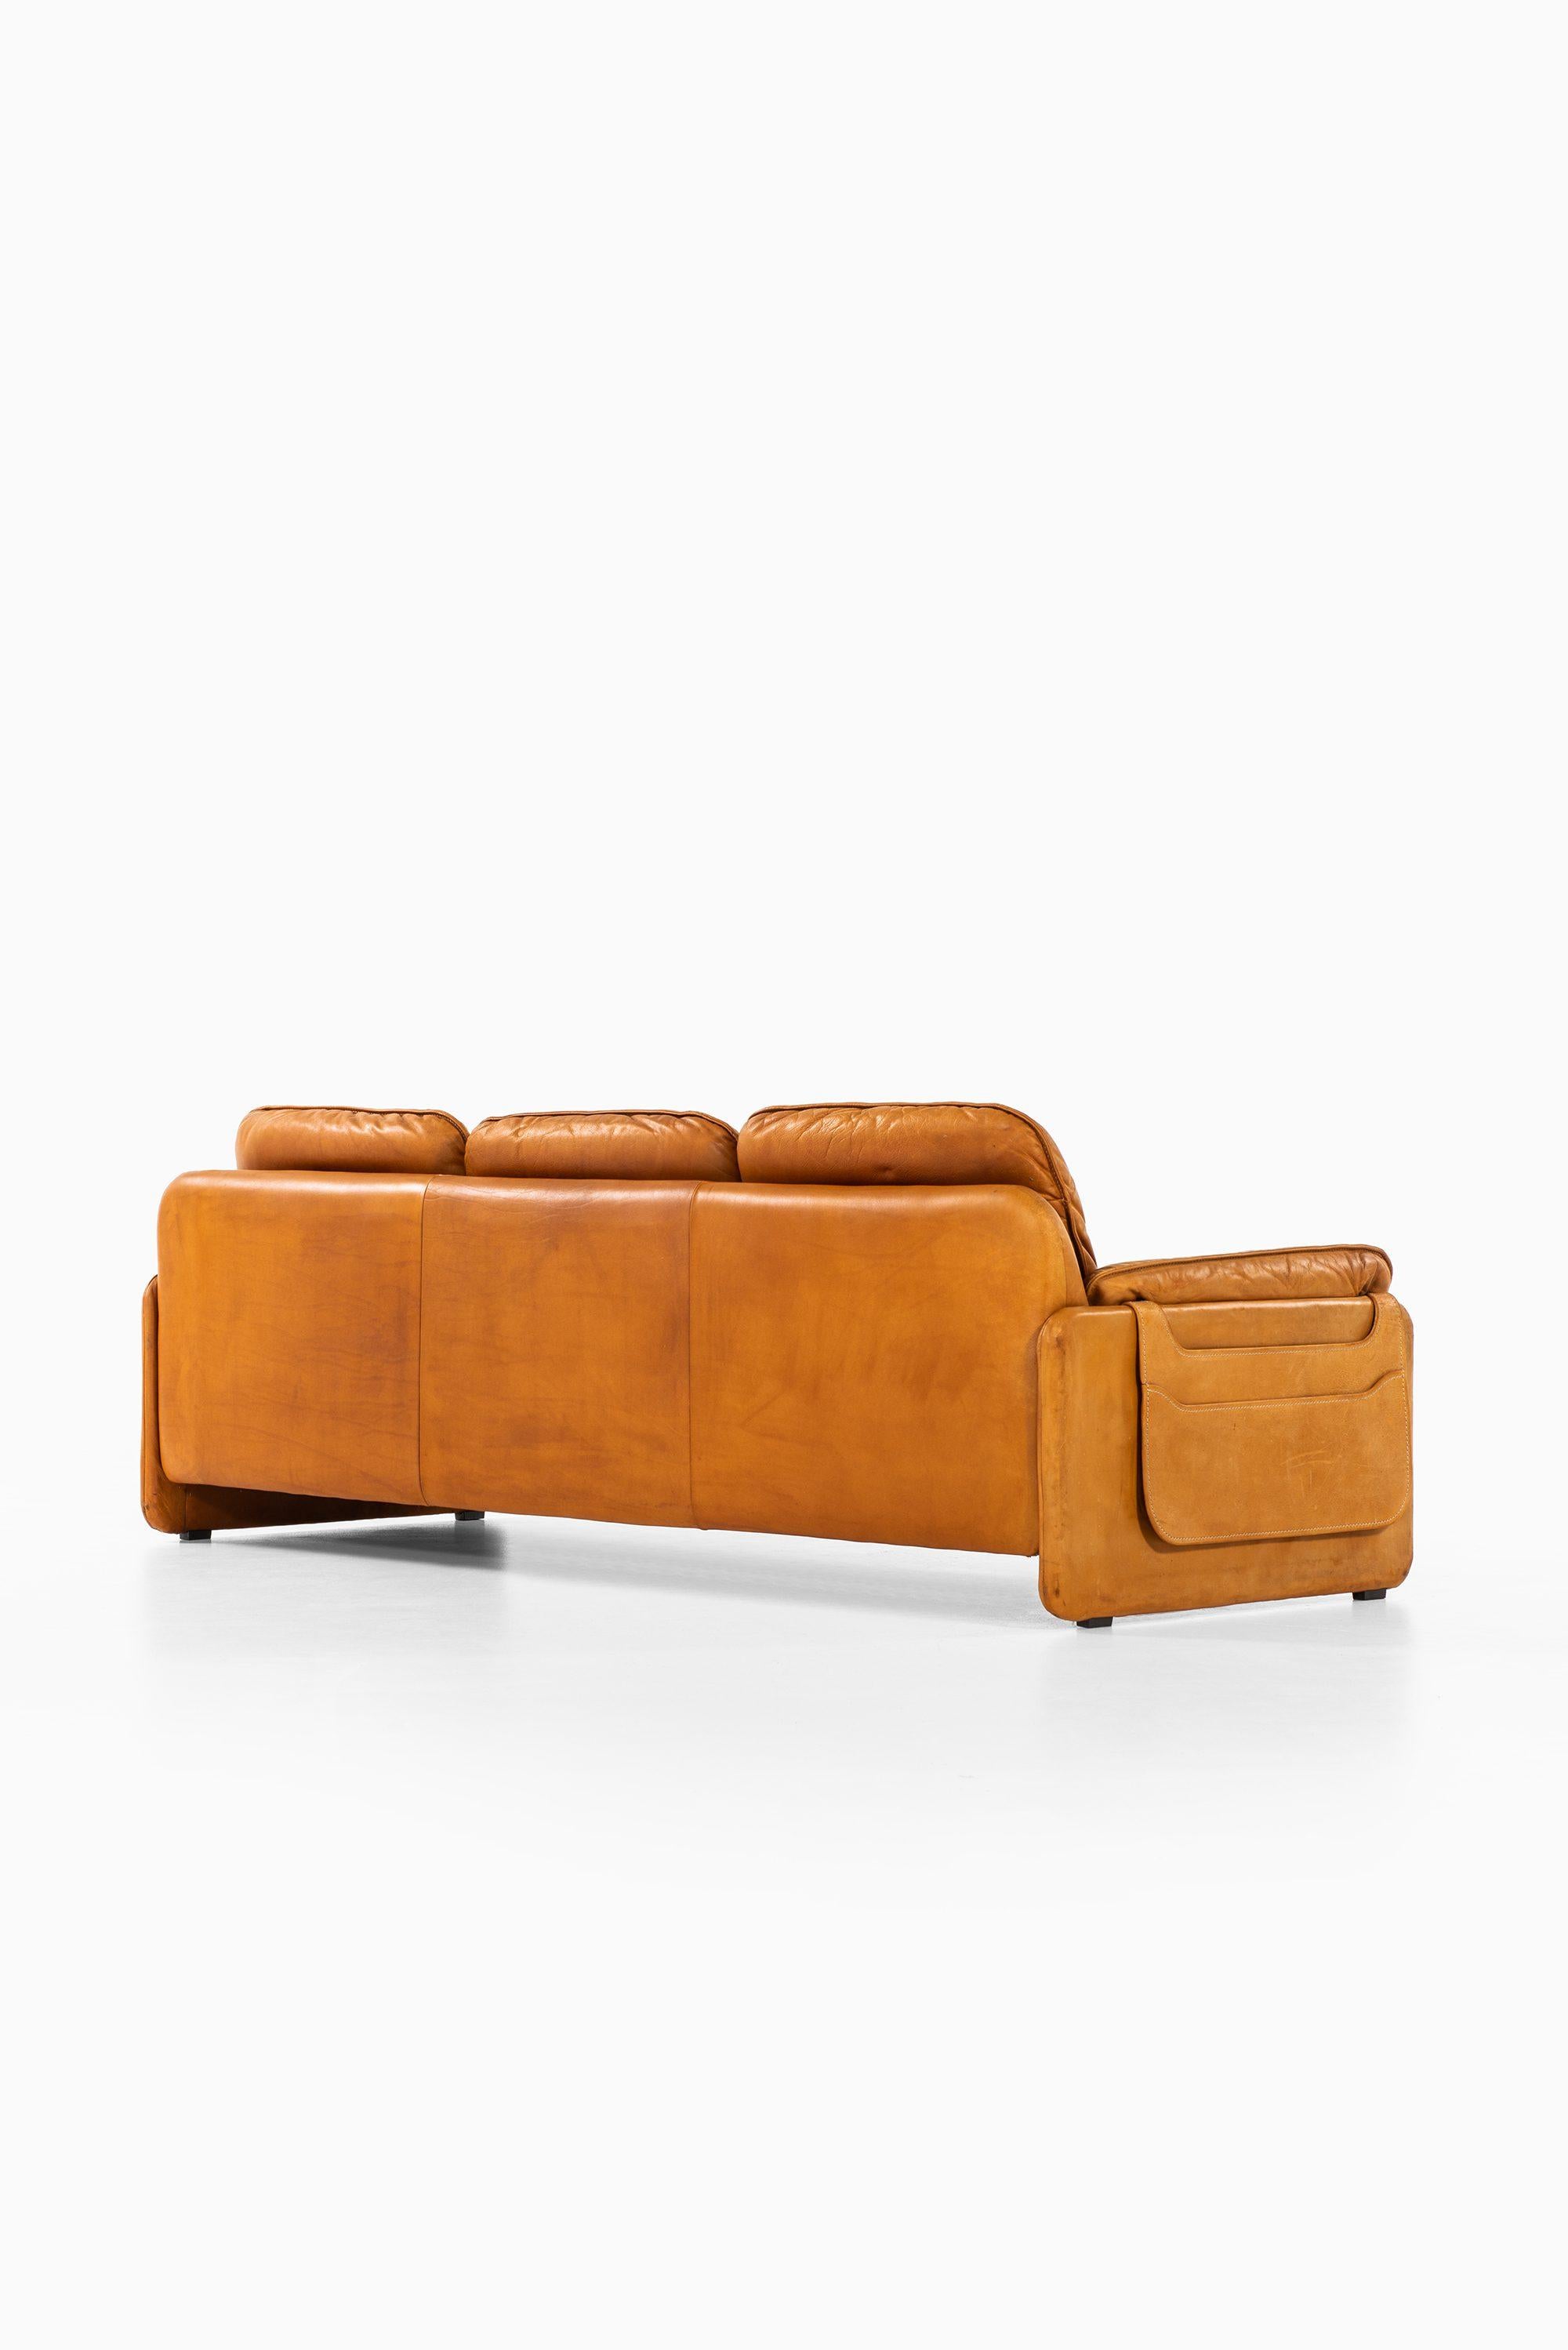 Sofa Model DS-61 Produced by De Sede in Switzerland For Sale 2